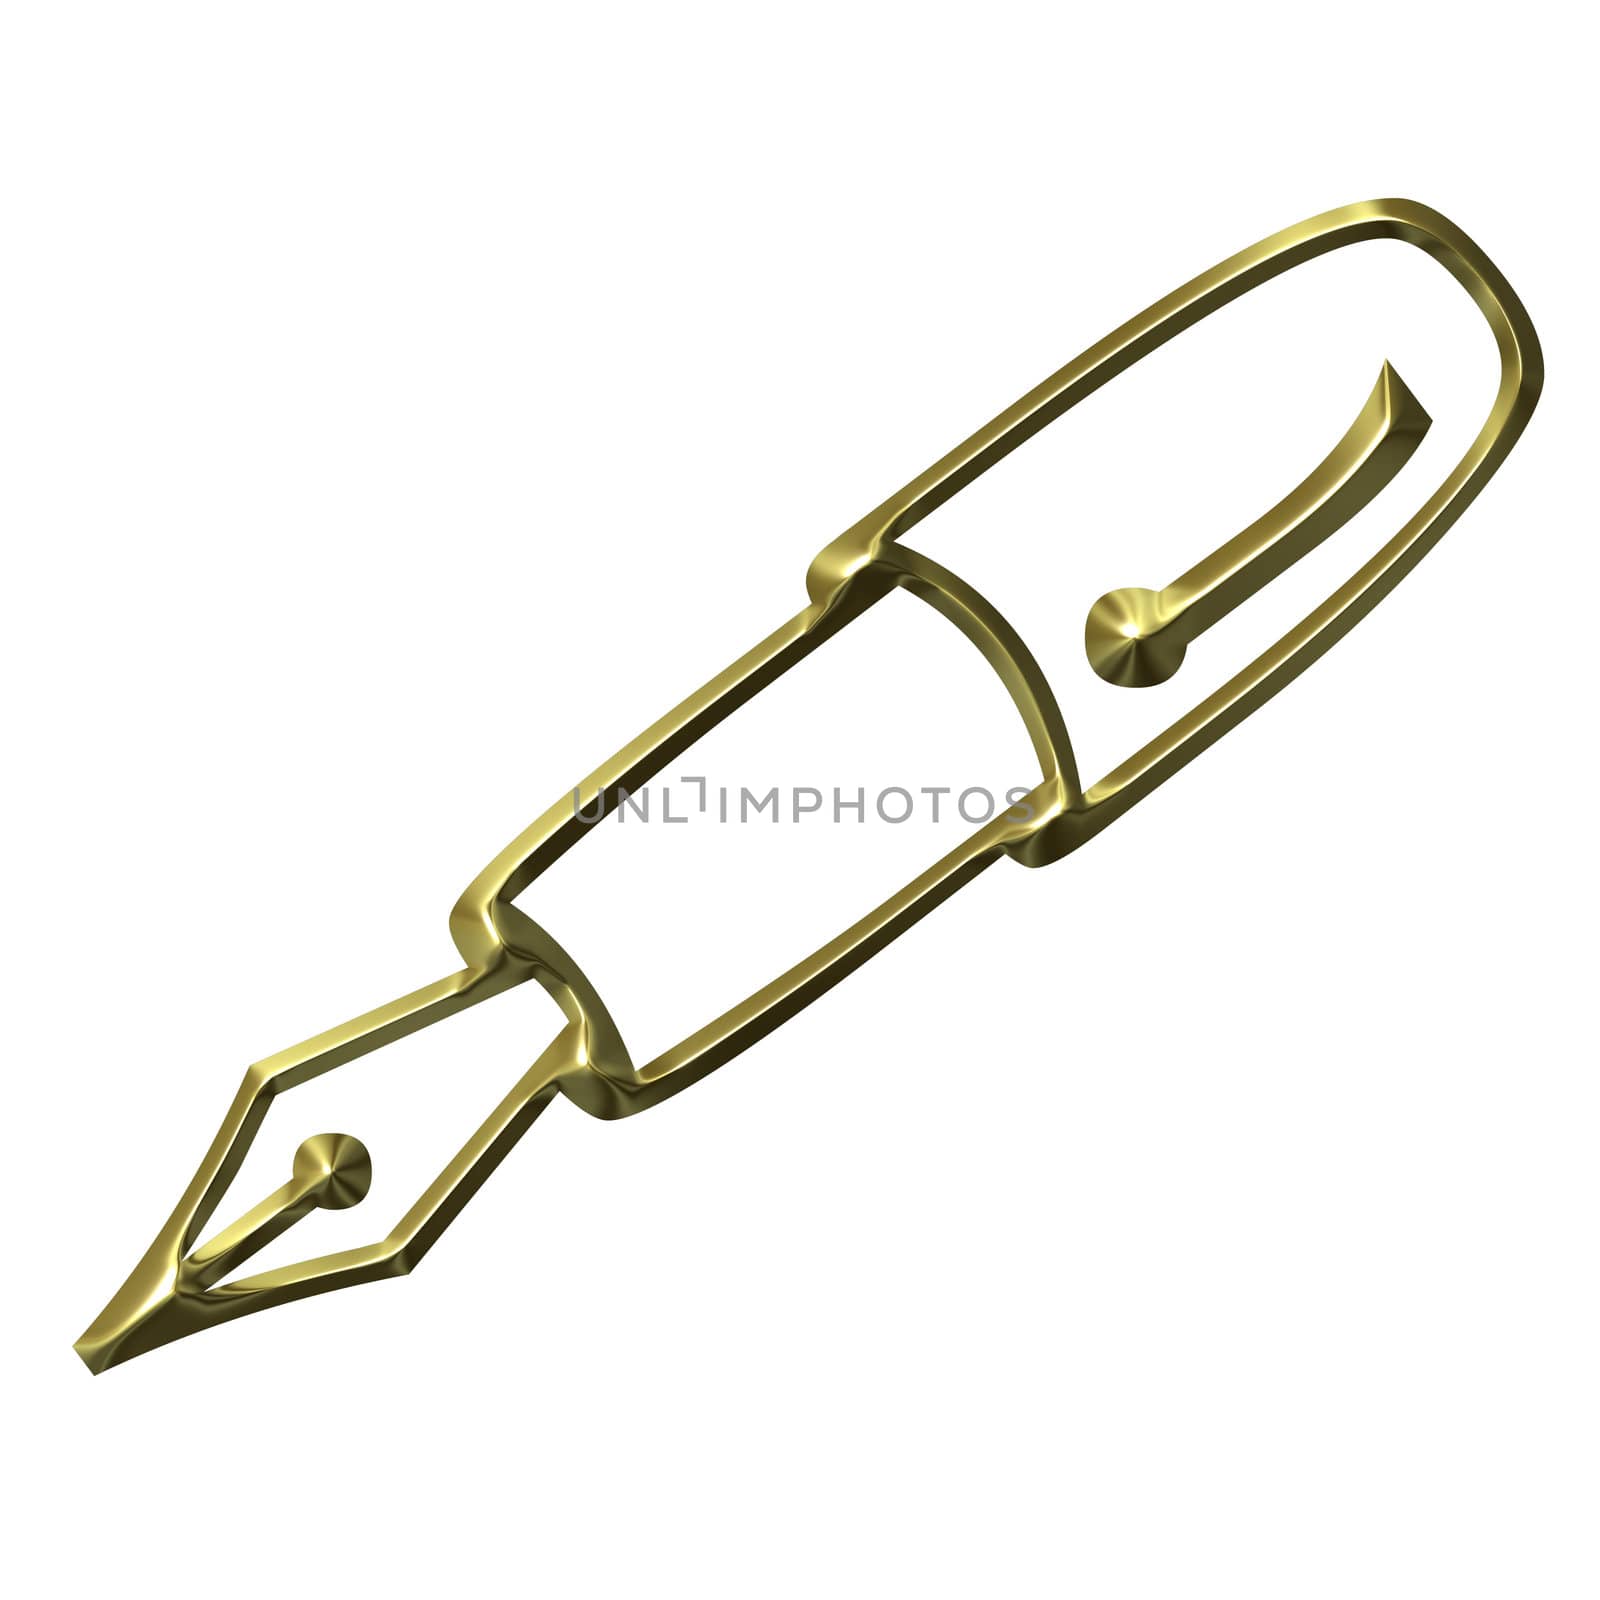 3d golden fountain pen isolated in white